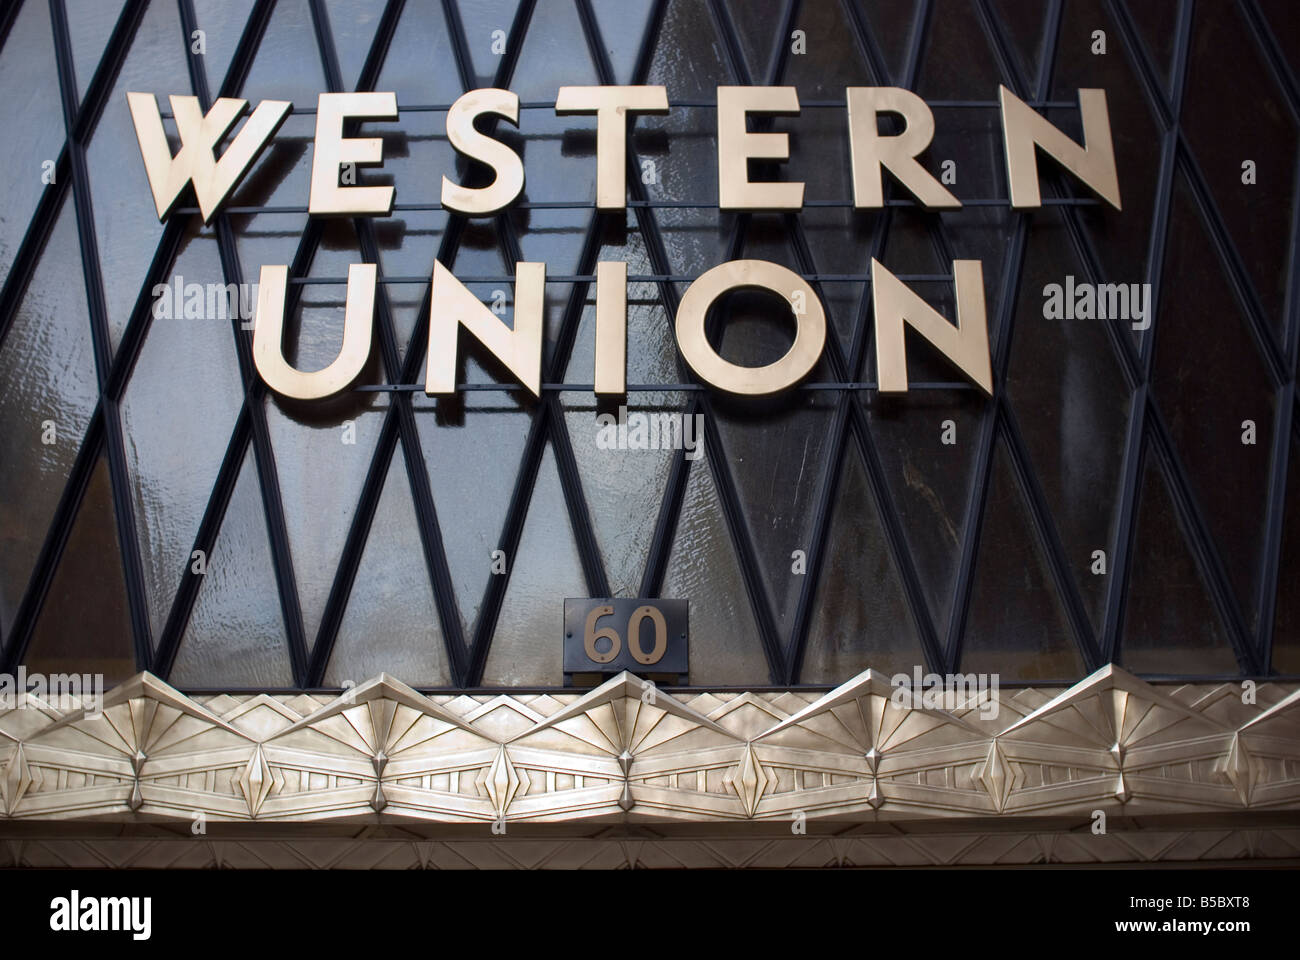 Western Union sign above the entrance to the 1930s art deco building, New York. Stock Photo